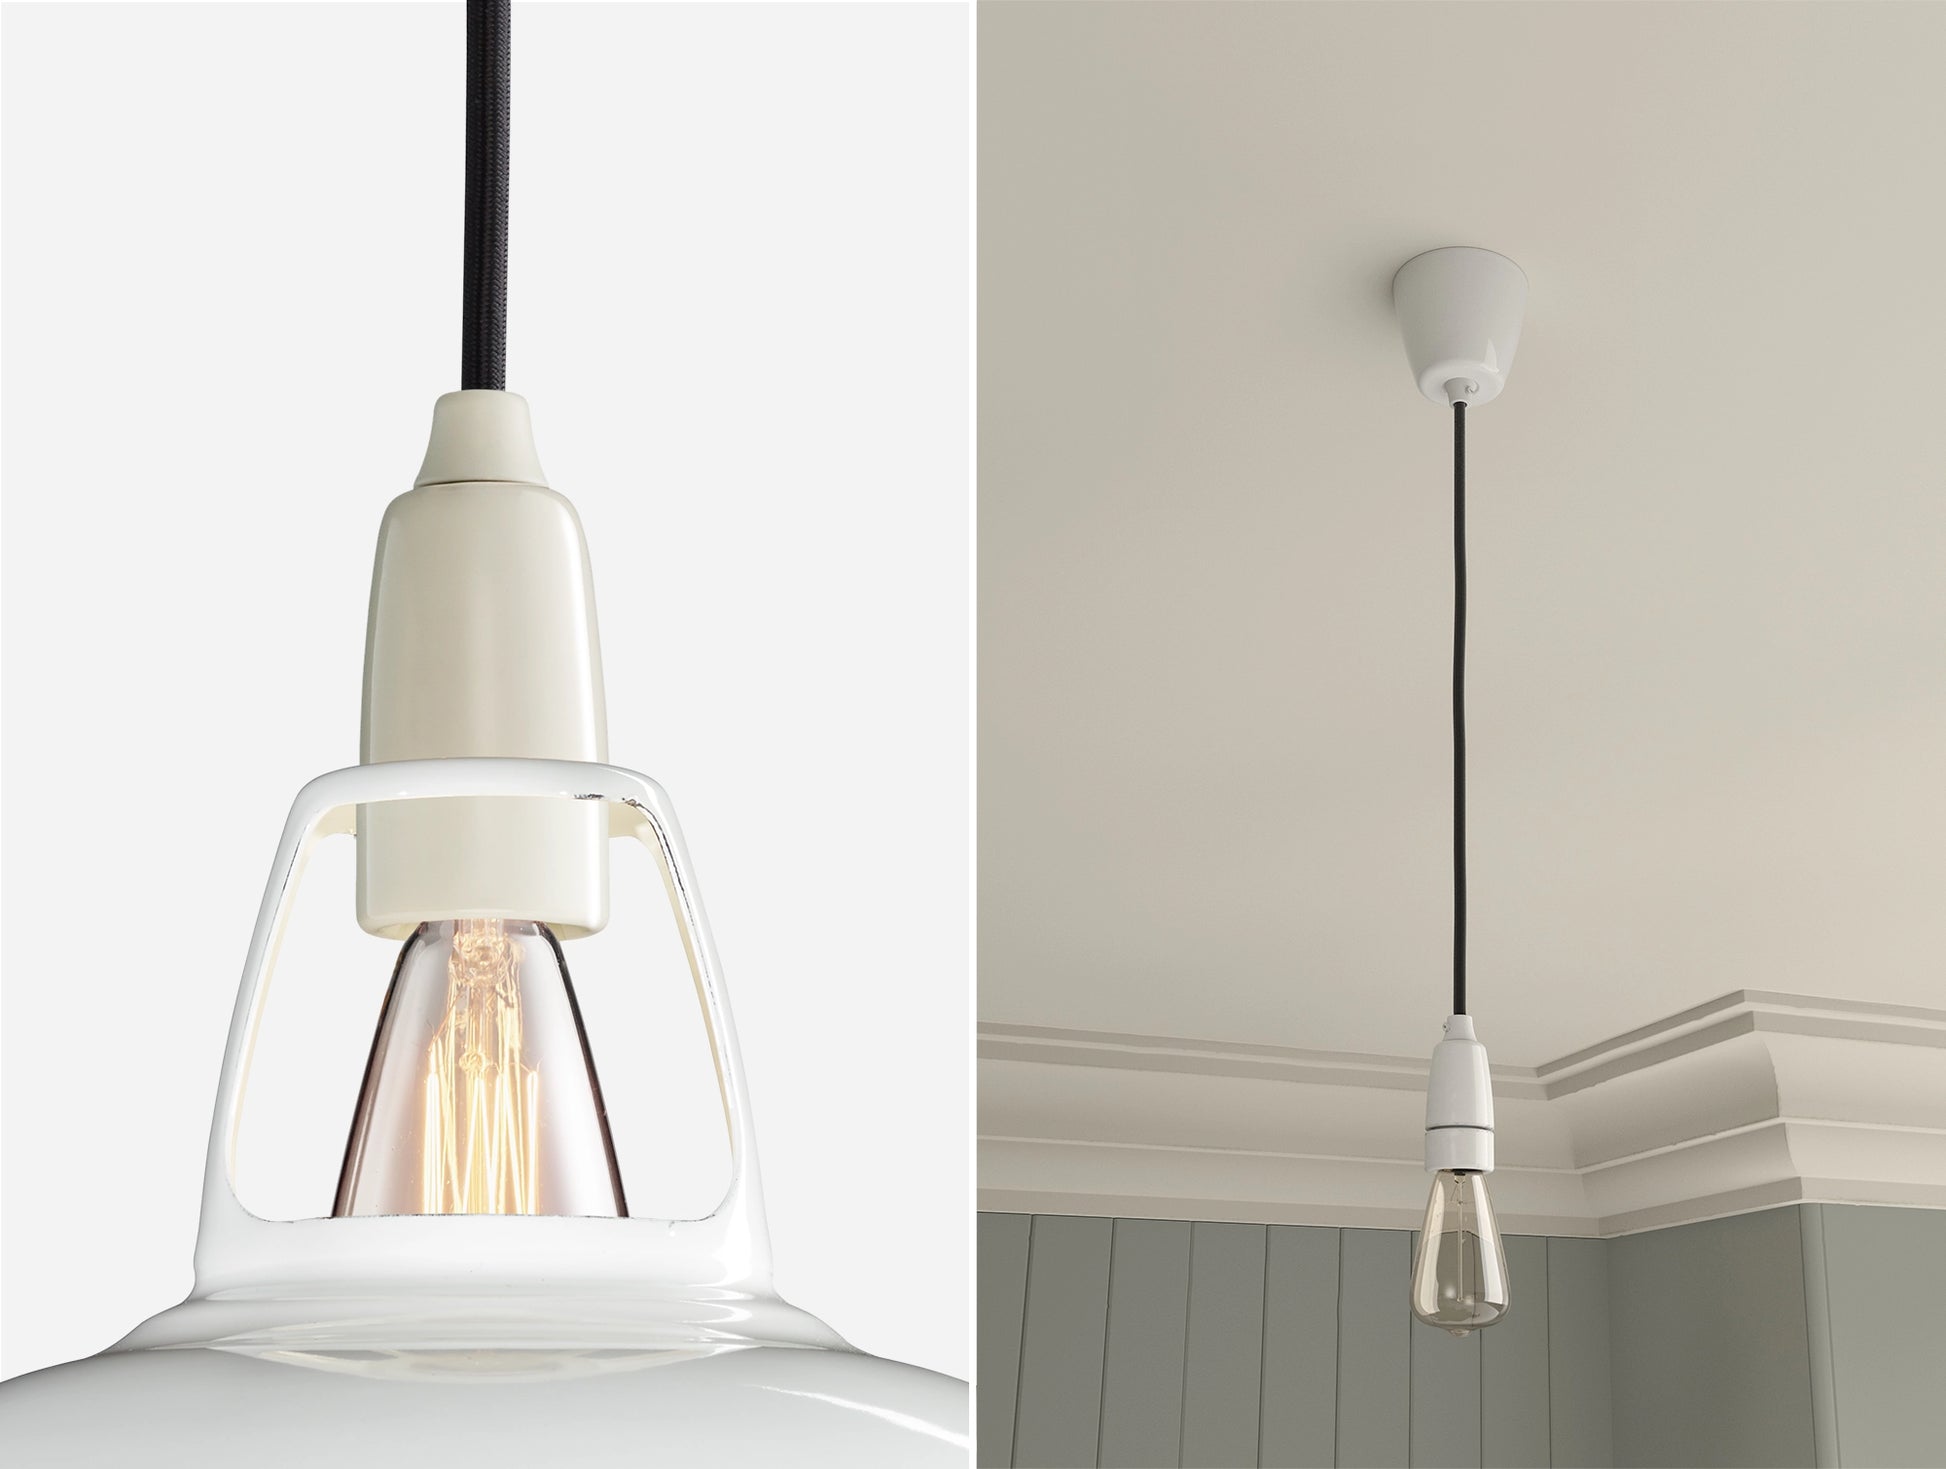 Close up of an E14 Porcelain suspension set on a Original White lampshade on the left. On the right, an E14 Porcelain pendant set with a lightbulb is hanging from the ceiling